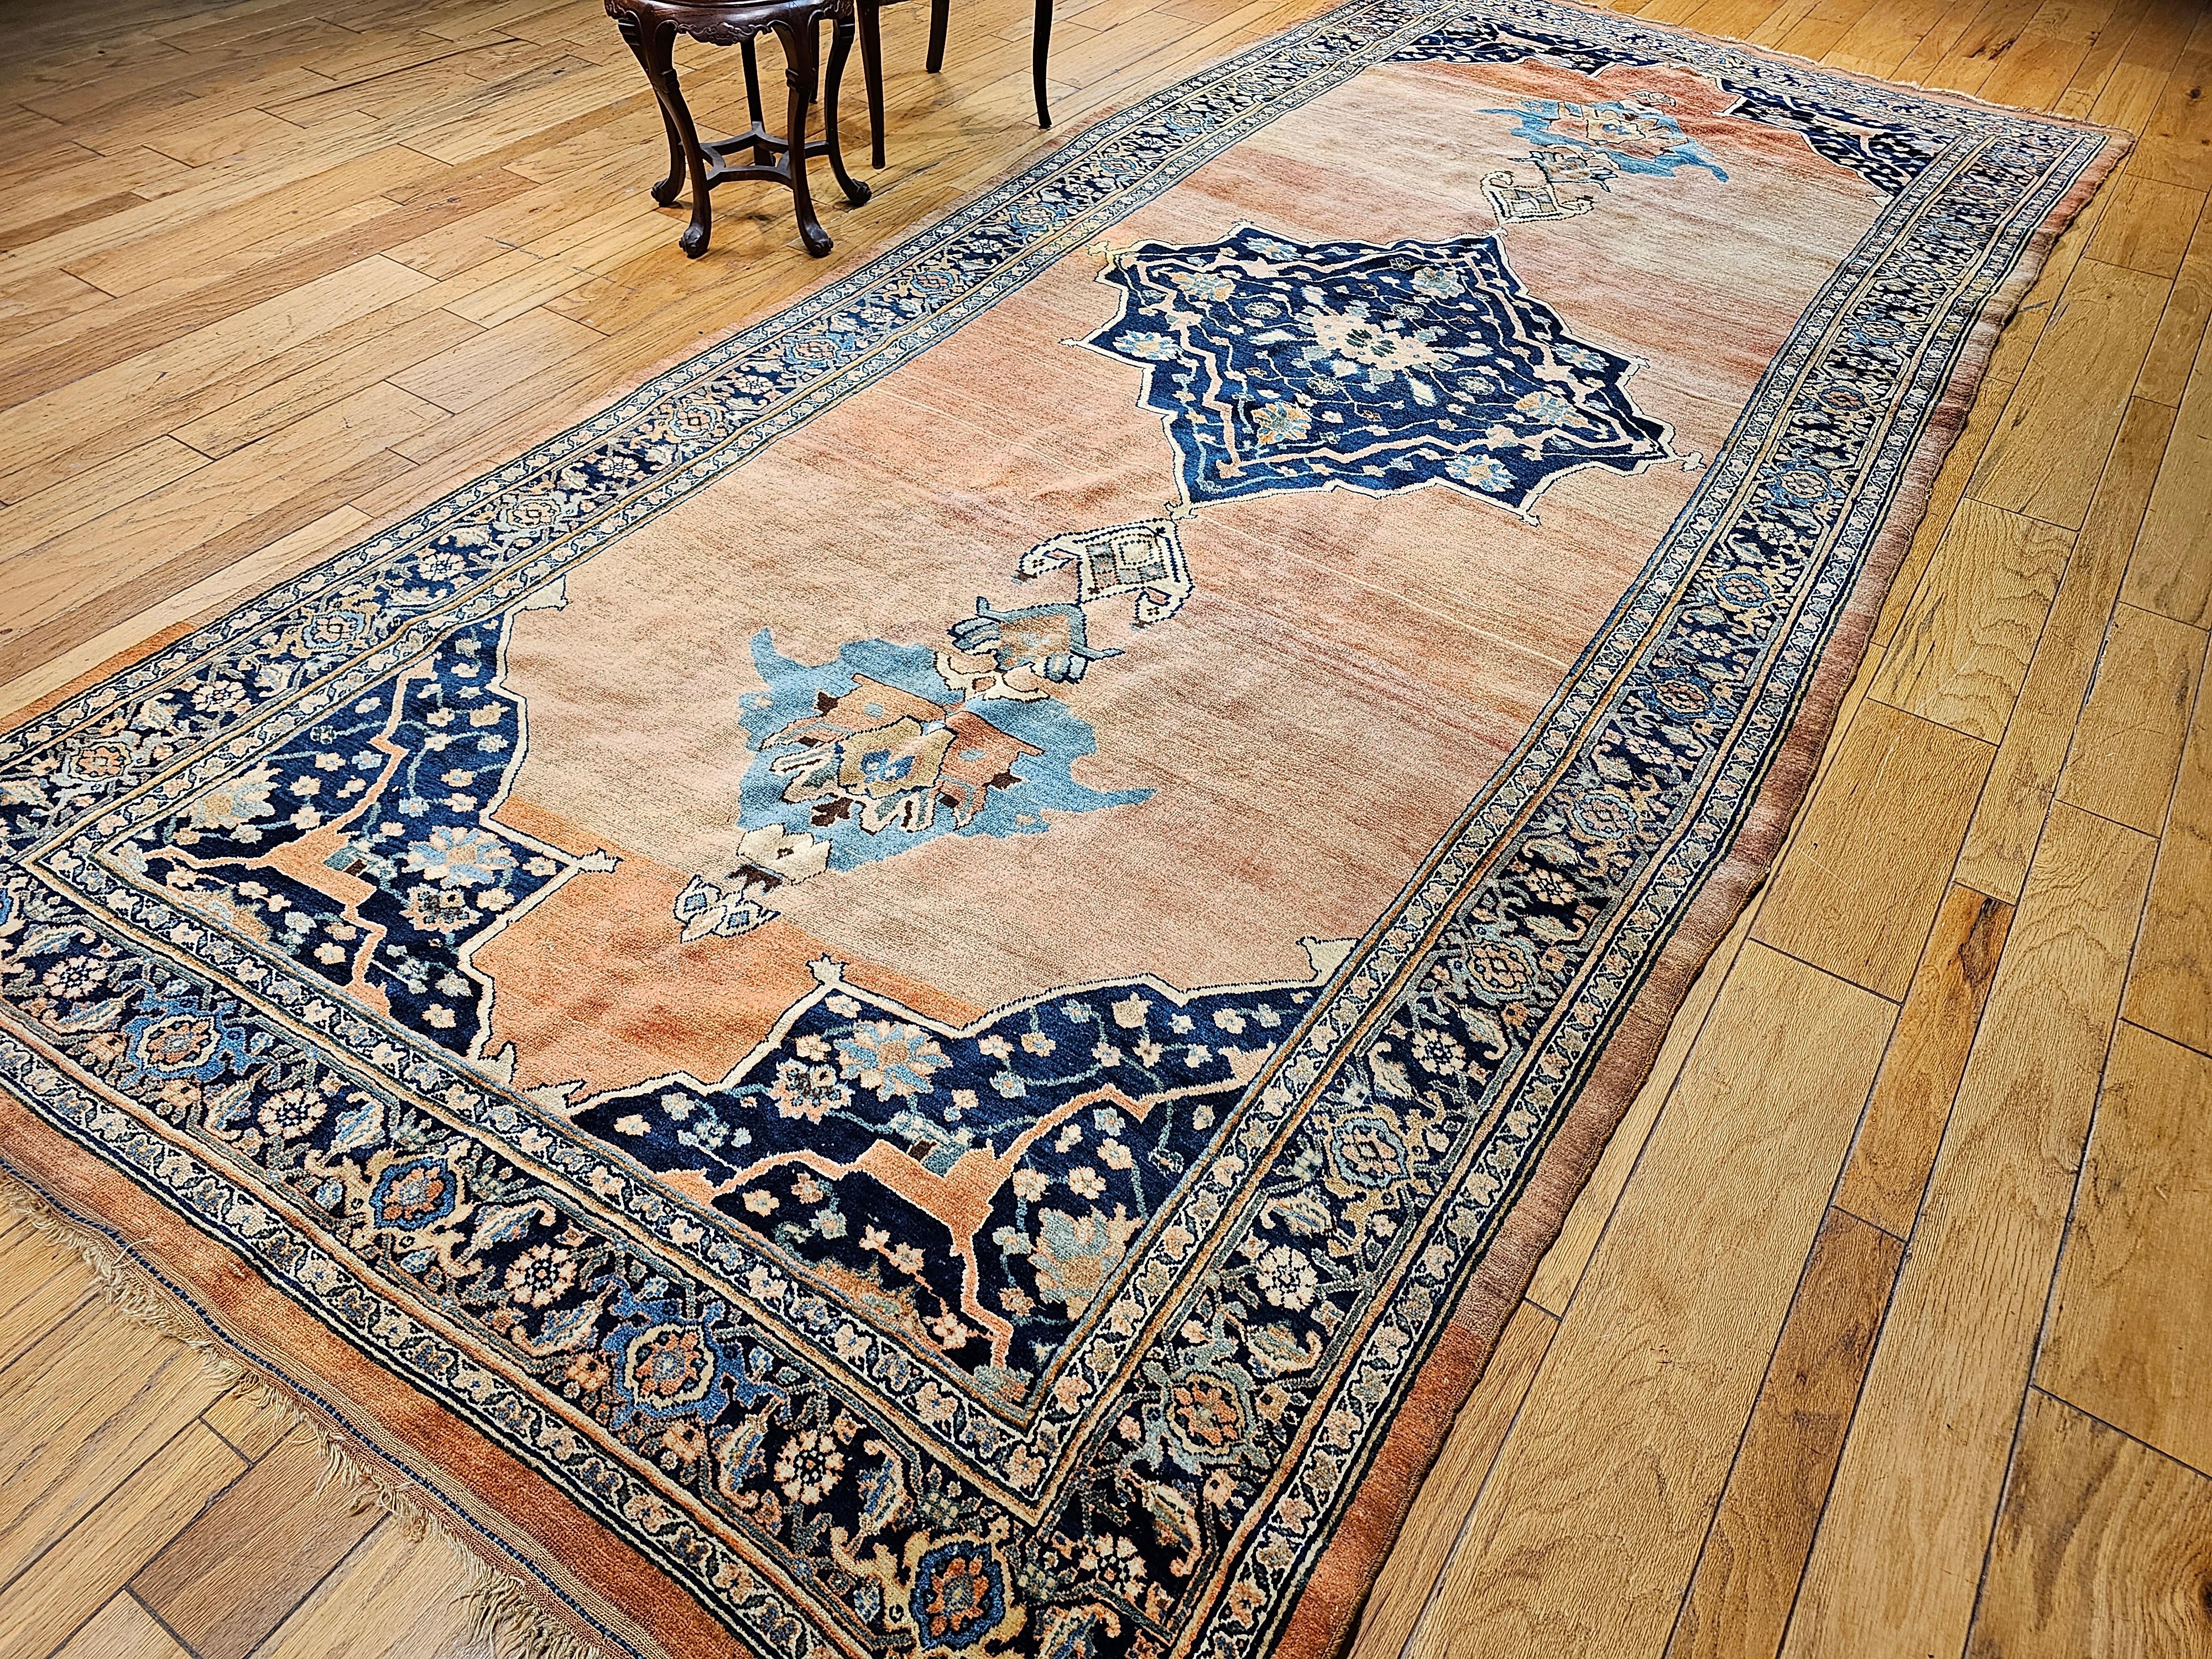 19th Century Persian Bidjar Gallery Rug in Brick-Red, Navy, Turquoise, Yellow For Sale 8